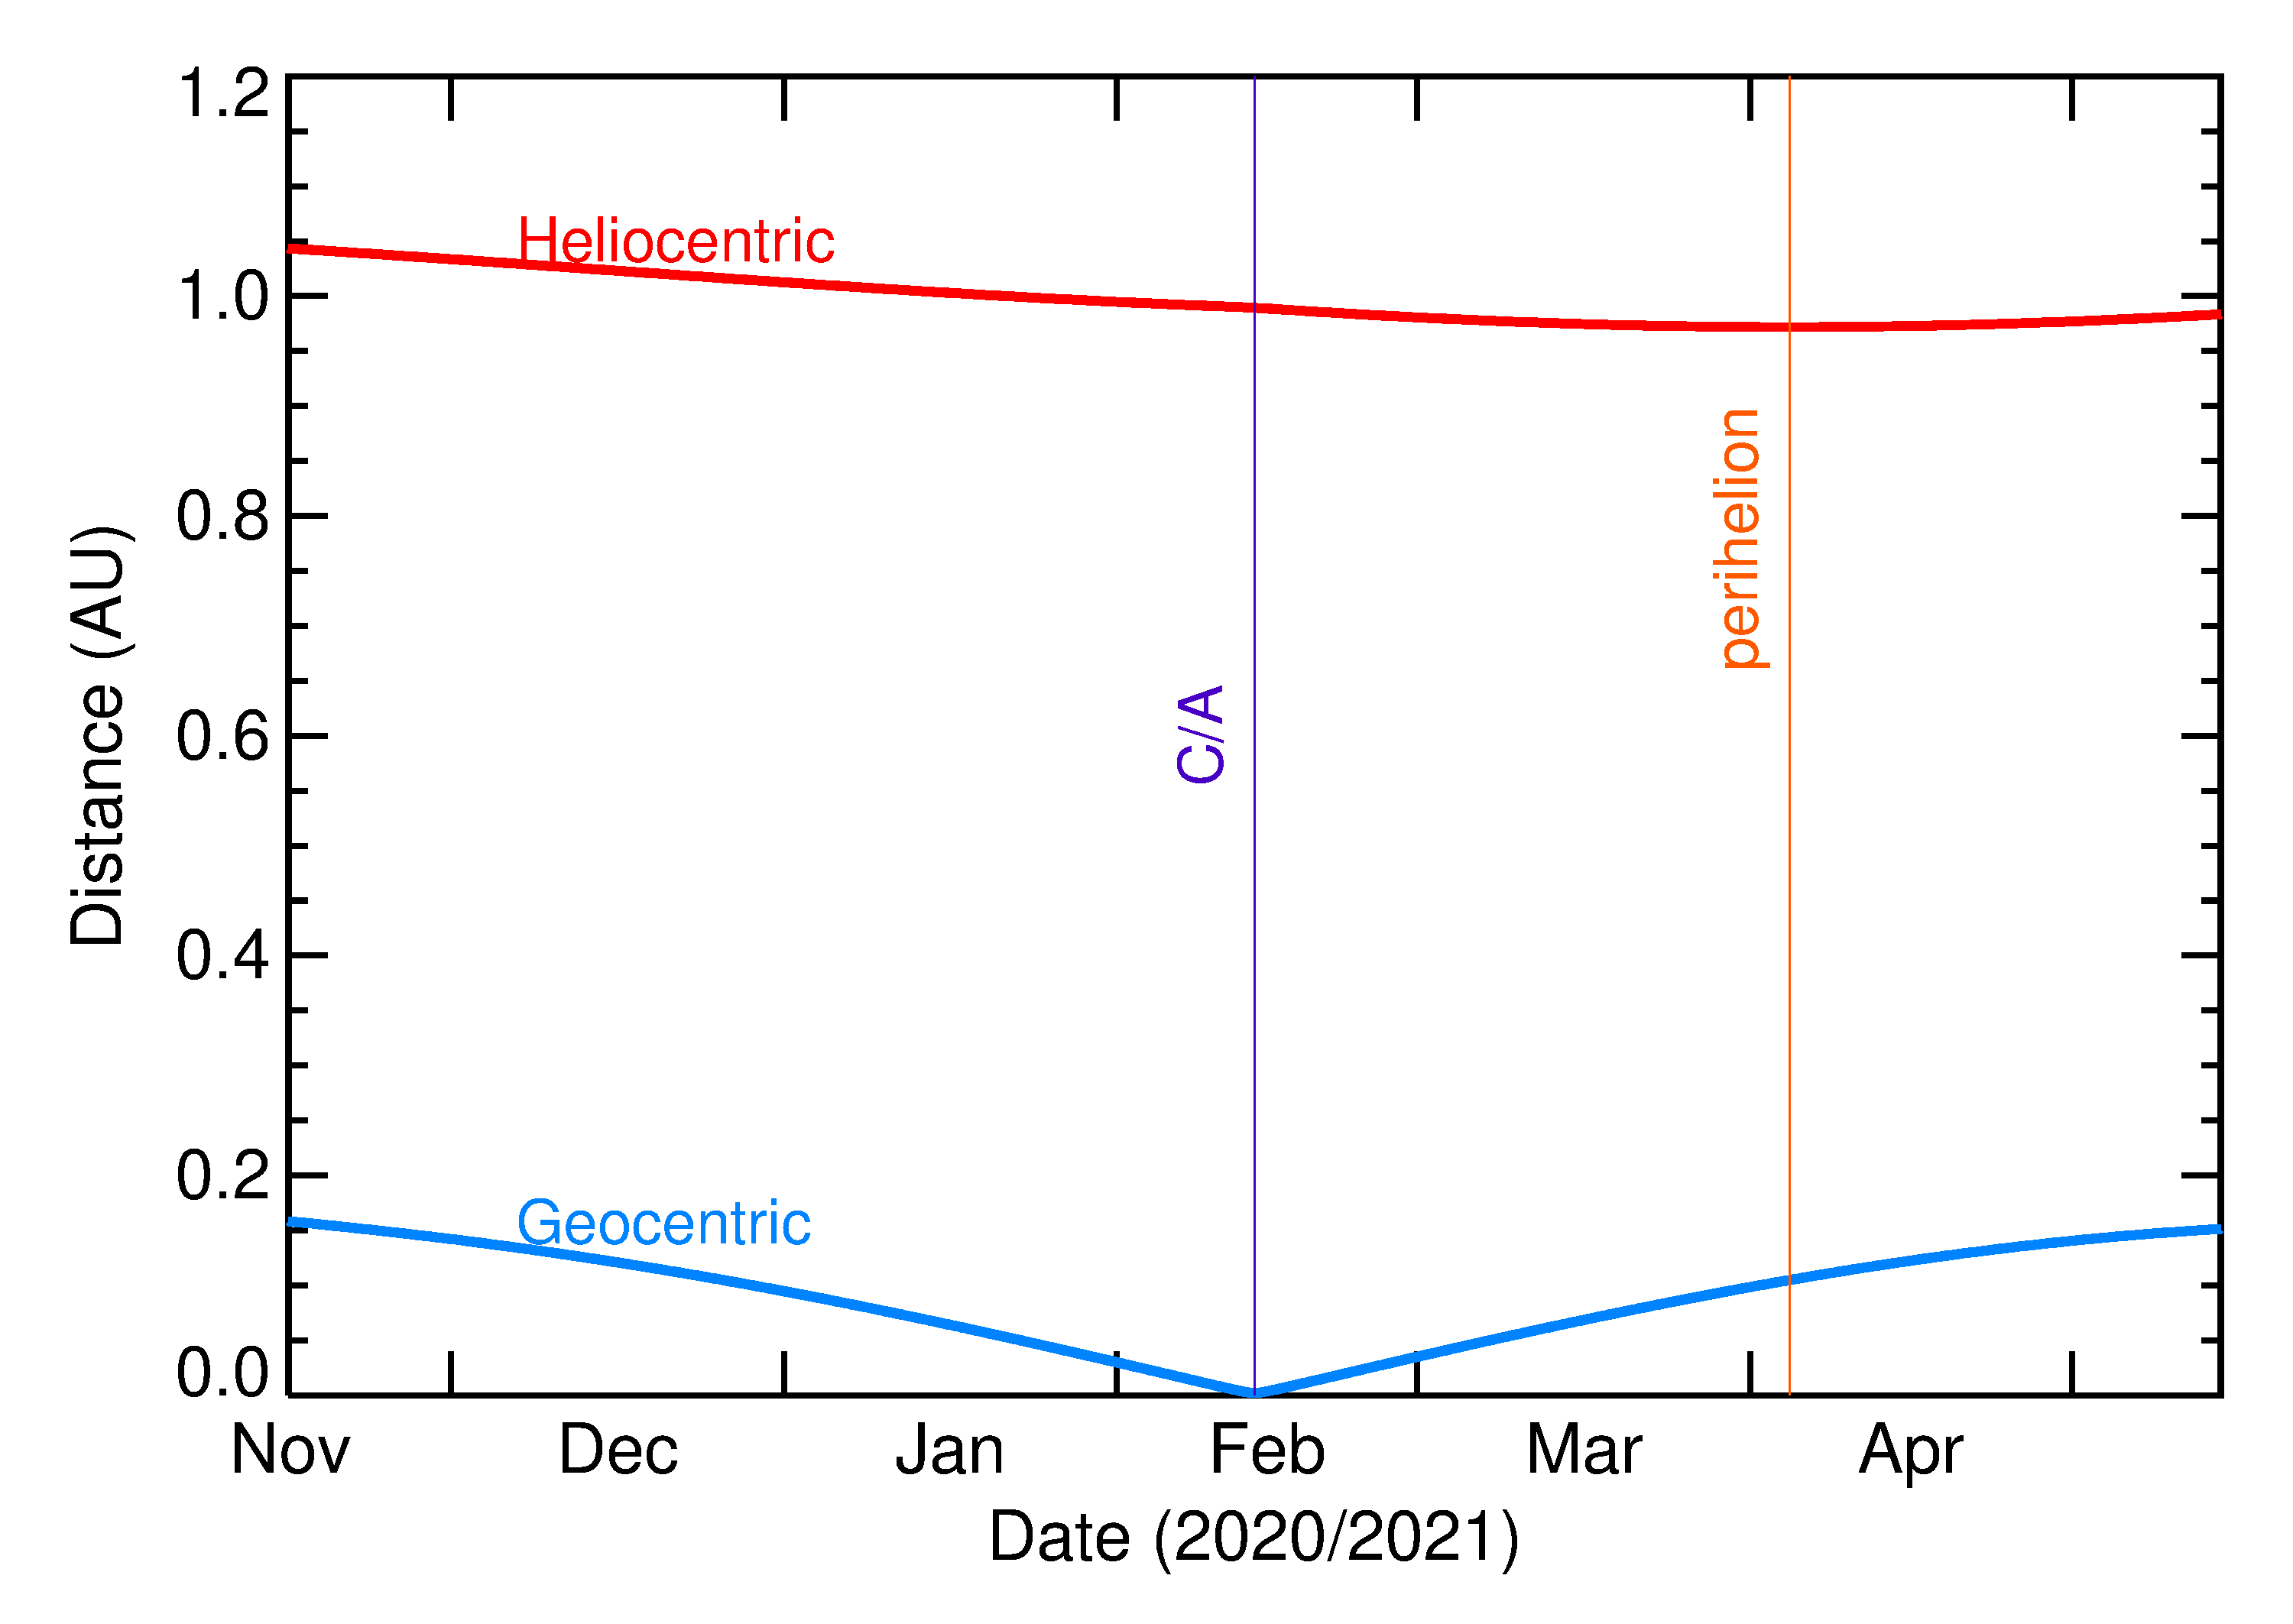 Heliocentric and Geocentric Distances of 2021 CC7 in the months around closest approach